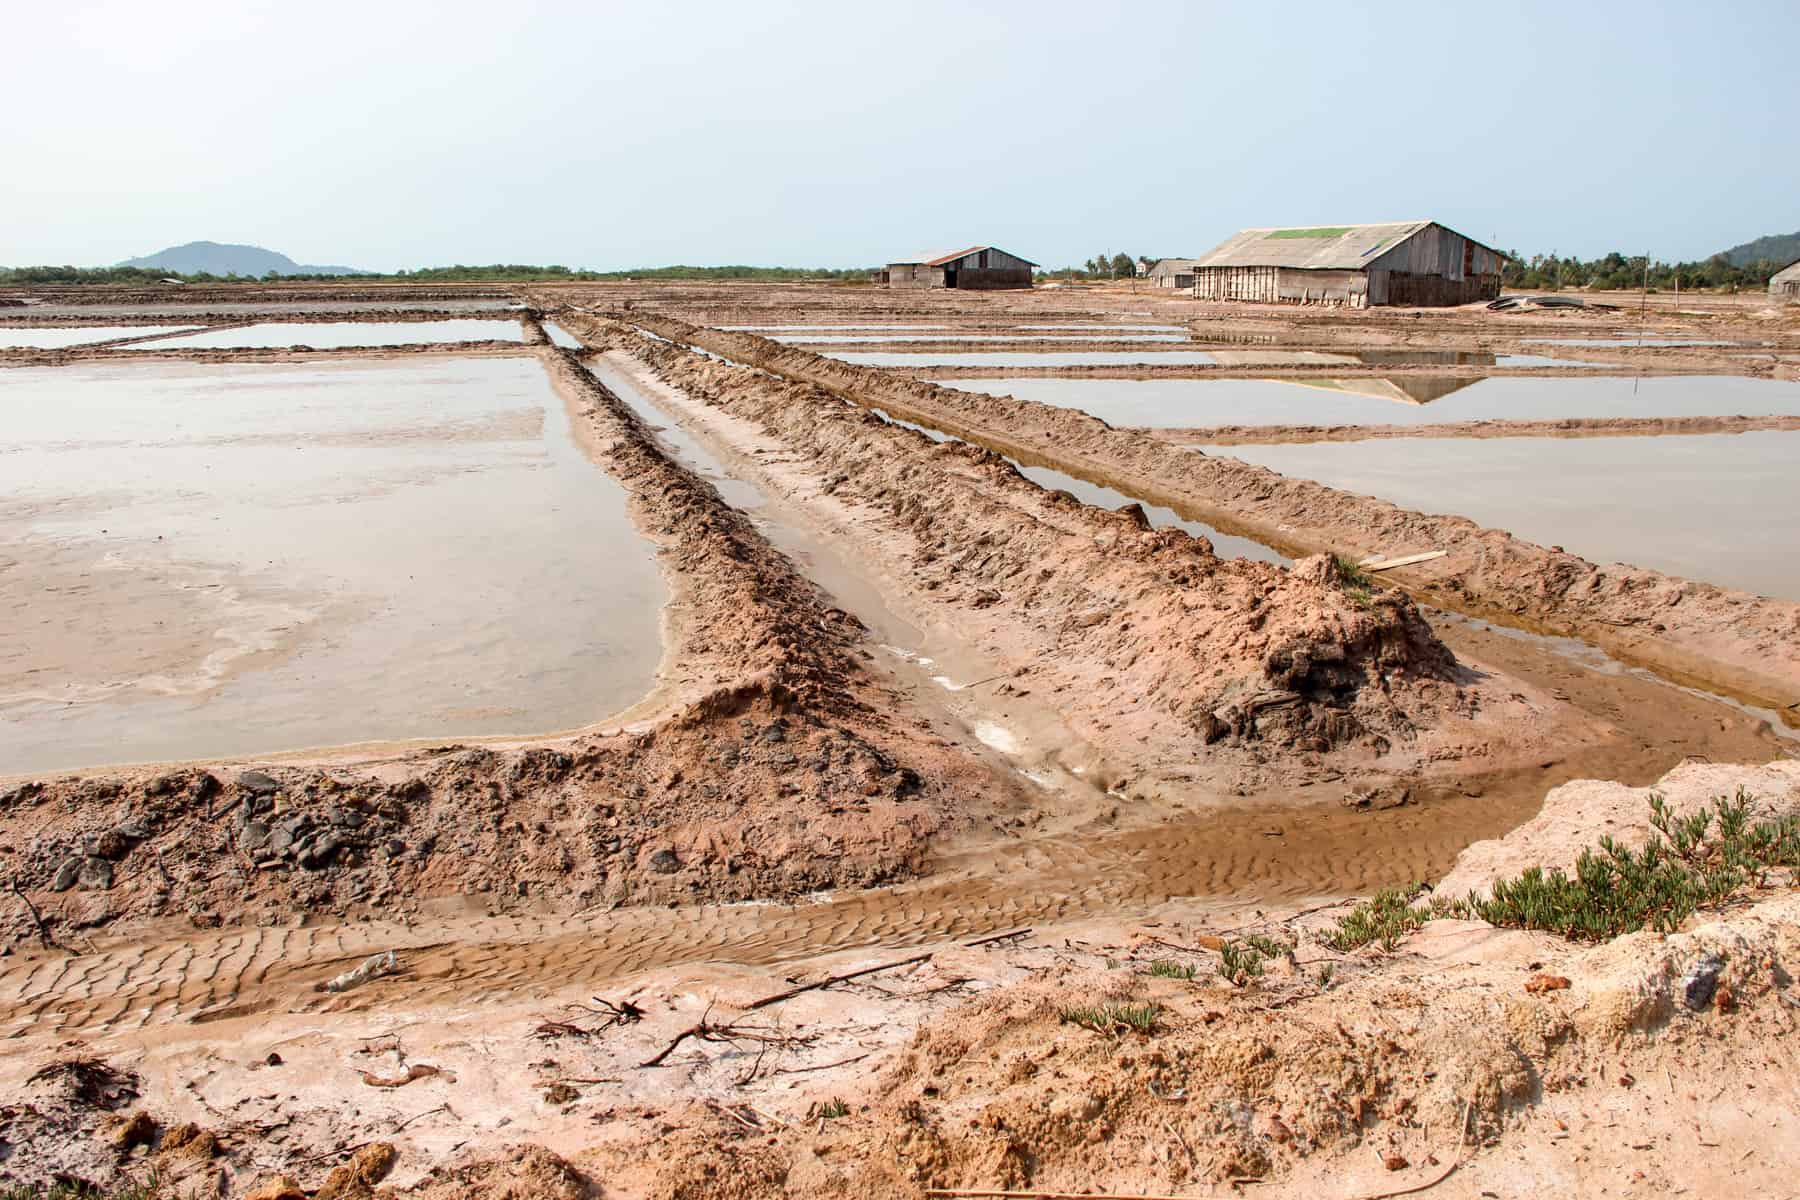 Pools of water with man made mud walls form the Kampot Salt Fields. In the distance is a large wooden storage building. 